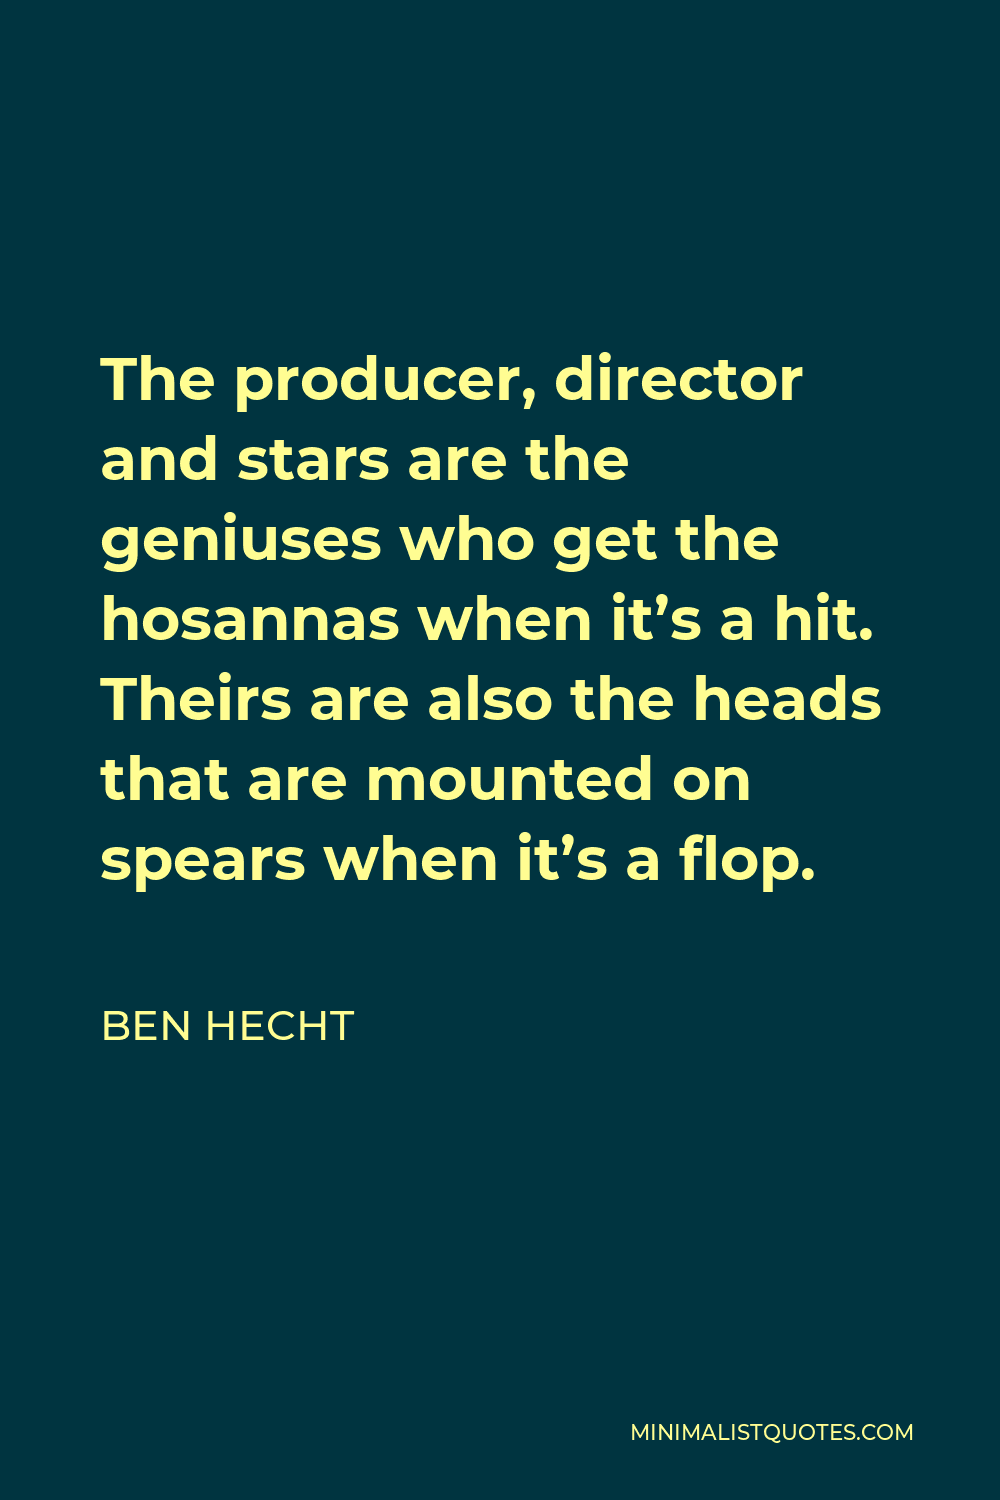 Ben Hecht Quote - The producer, director and stars are the geniuses who get the hosannas when it’s a hit. Theirs are also the heads that are mounted on spears when it’s a flop.